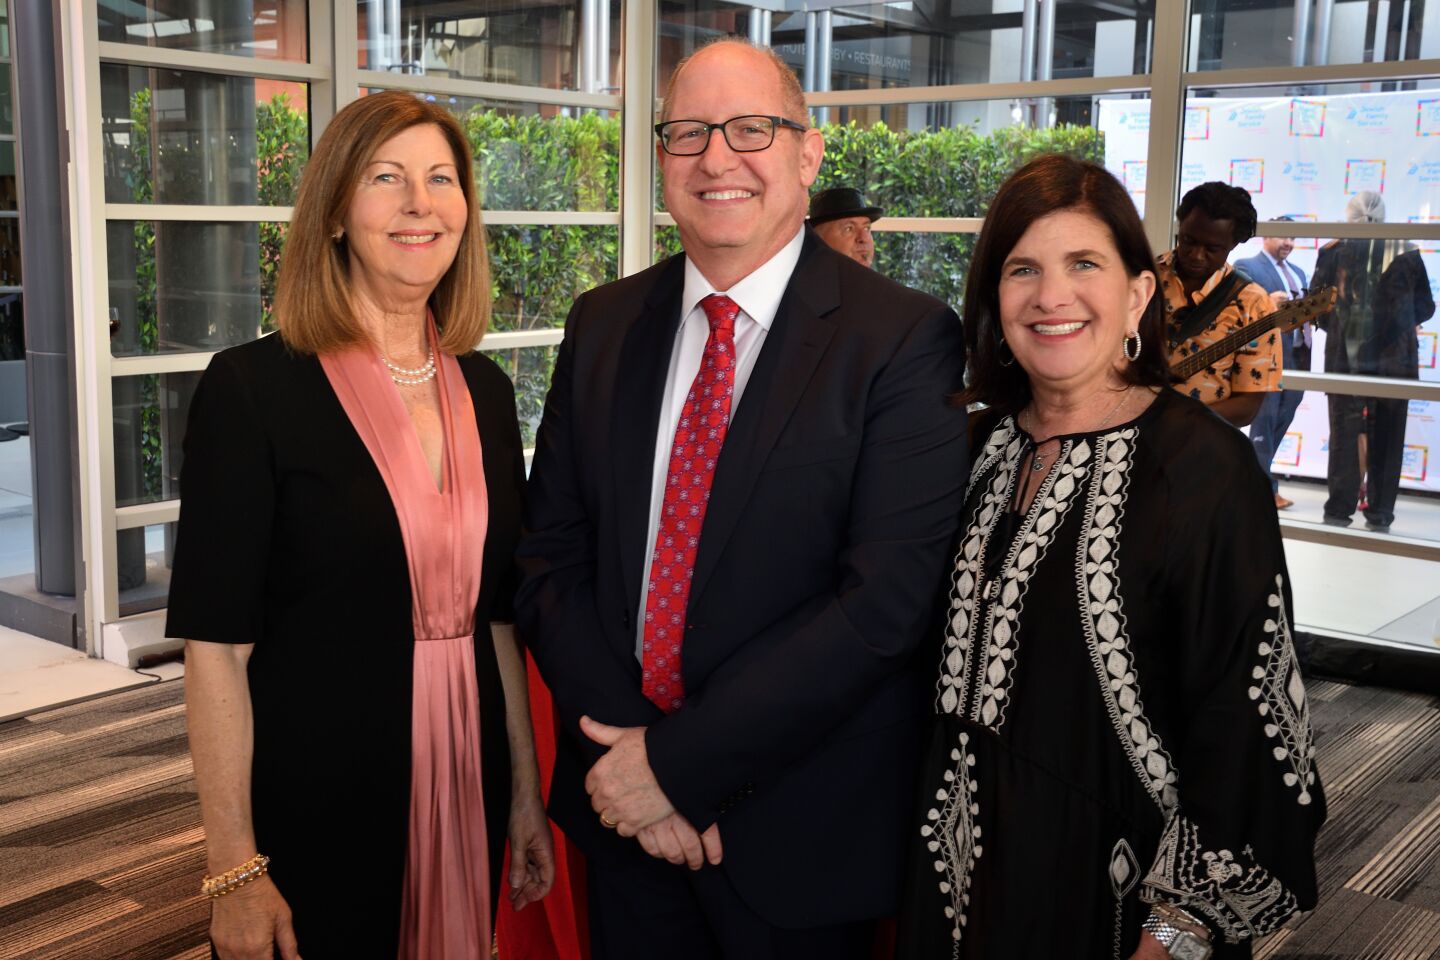 Mitzvah Honorees Marcia Hazan and La Jolla residents Brian and Danielle Miller gather at Jewish Family Service of San Diego's "Heart & Soul" gala April 30 at the Hyatt Regency La Jolla at Aventine.